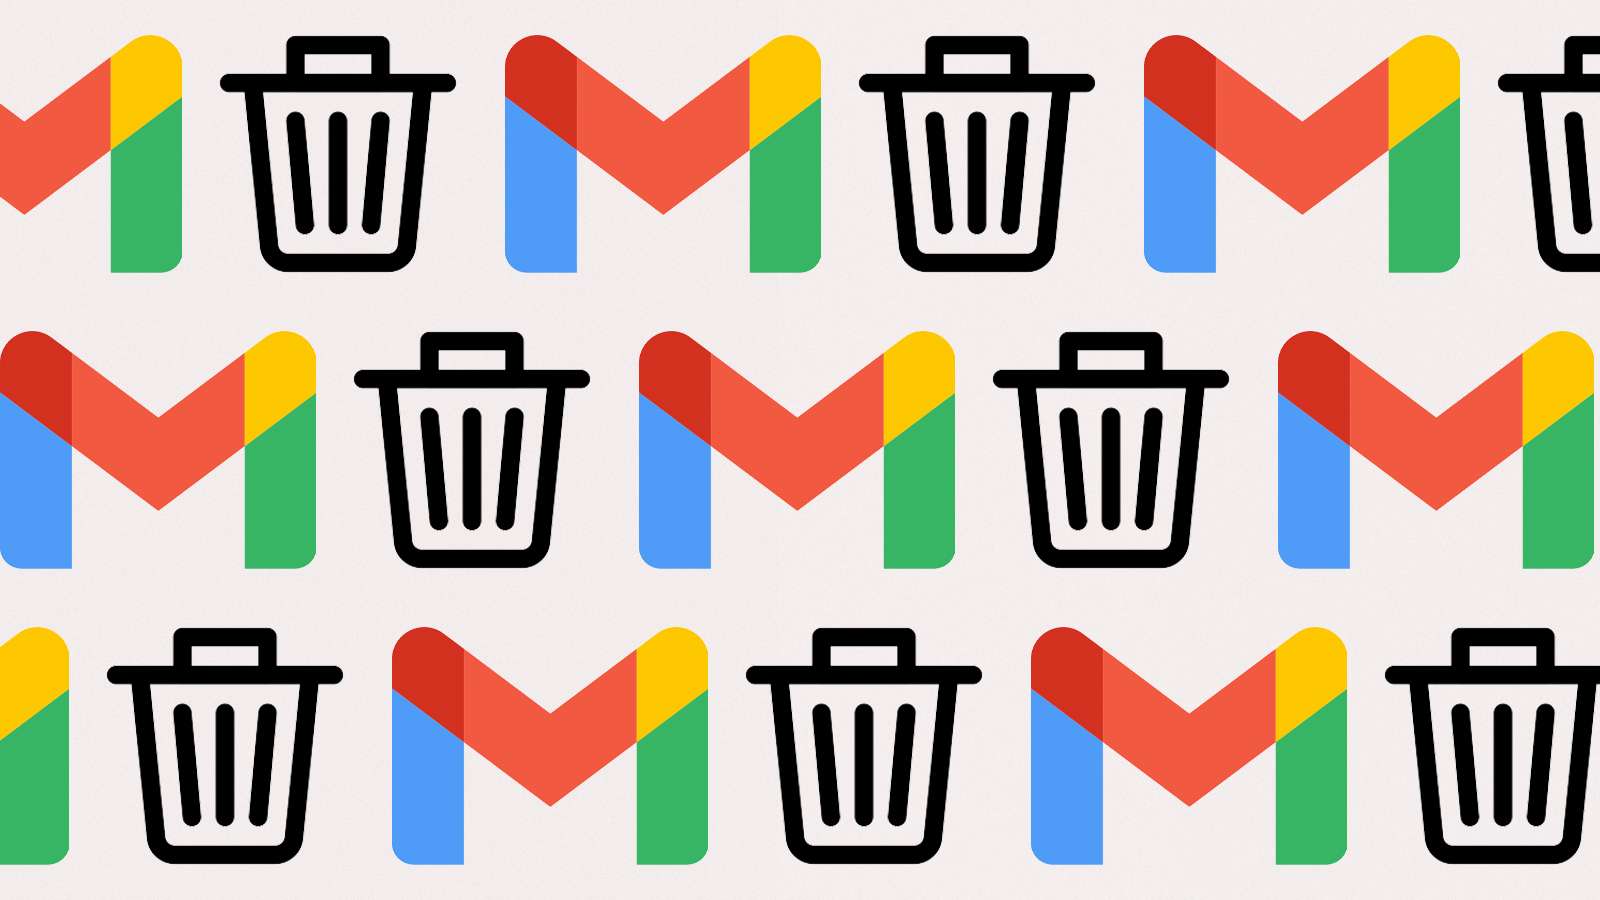 gmail and bin logos in a pattern